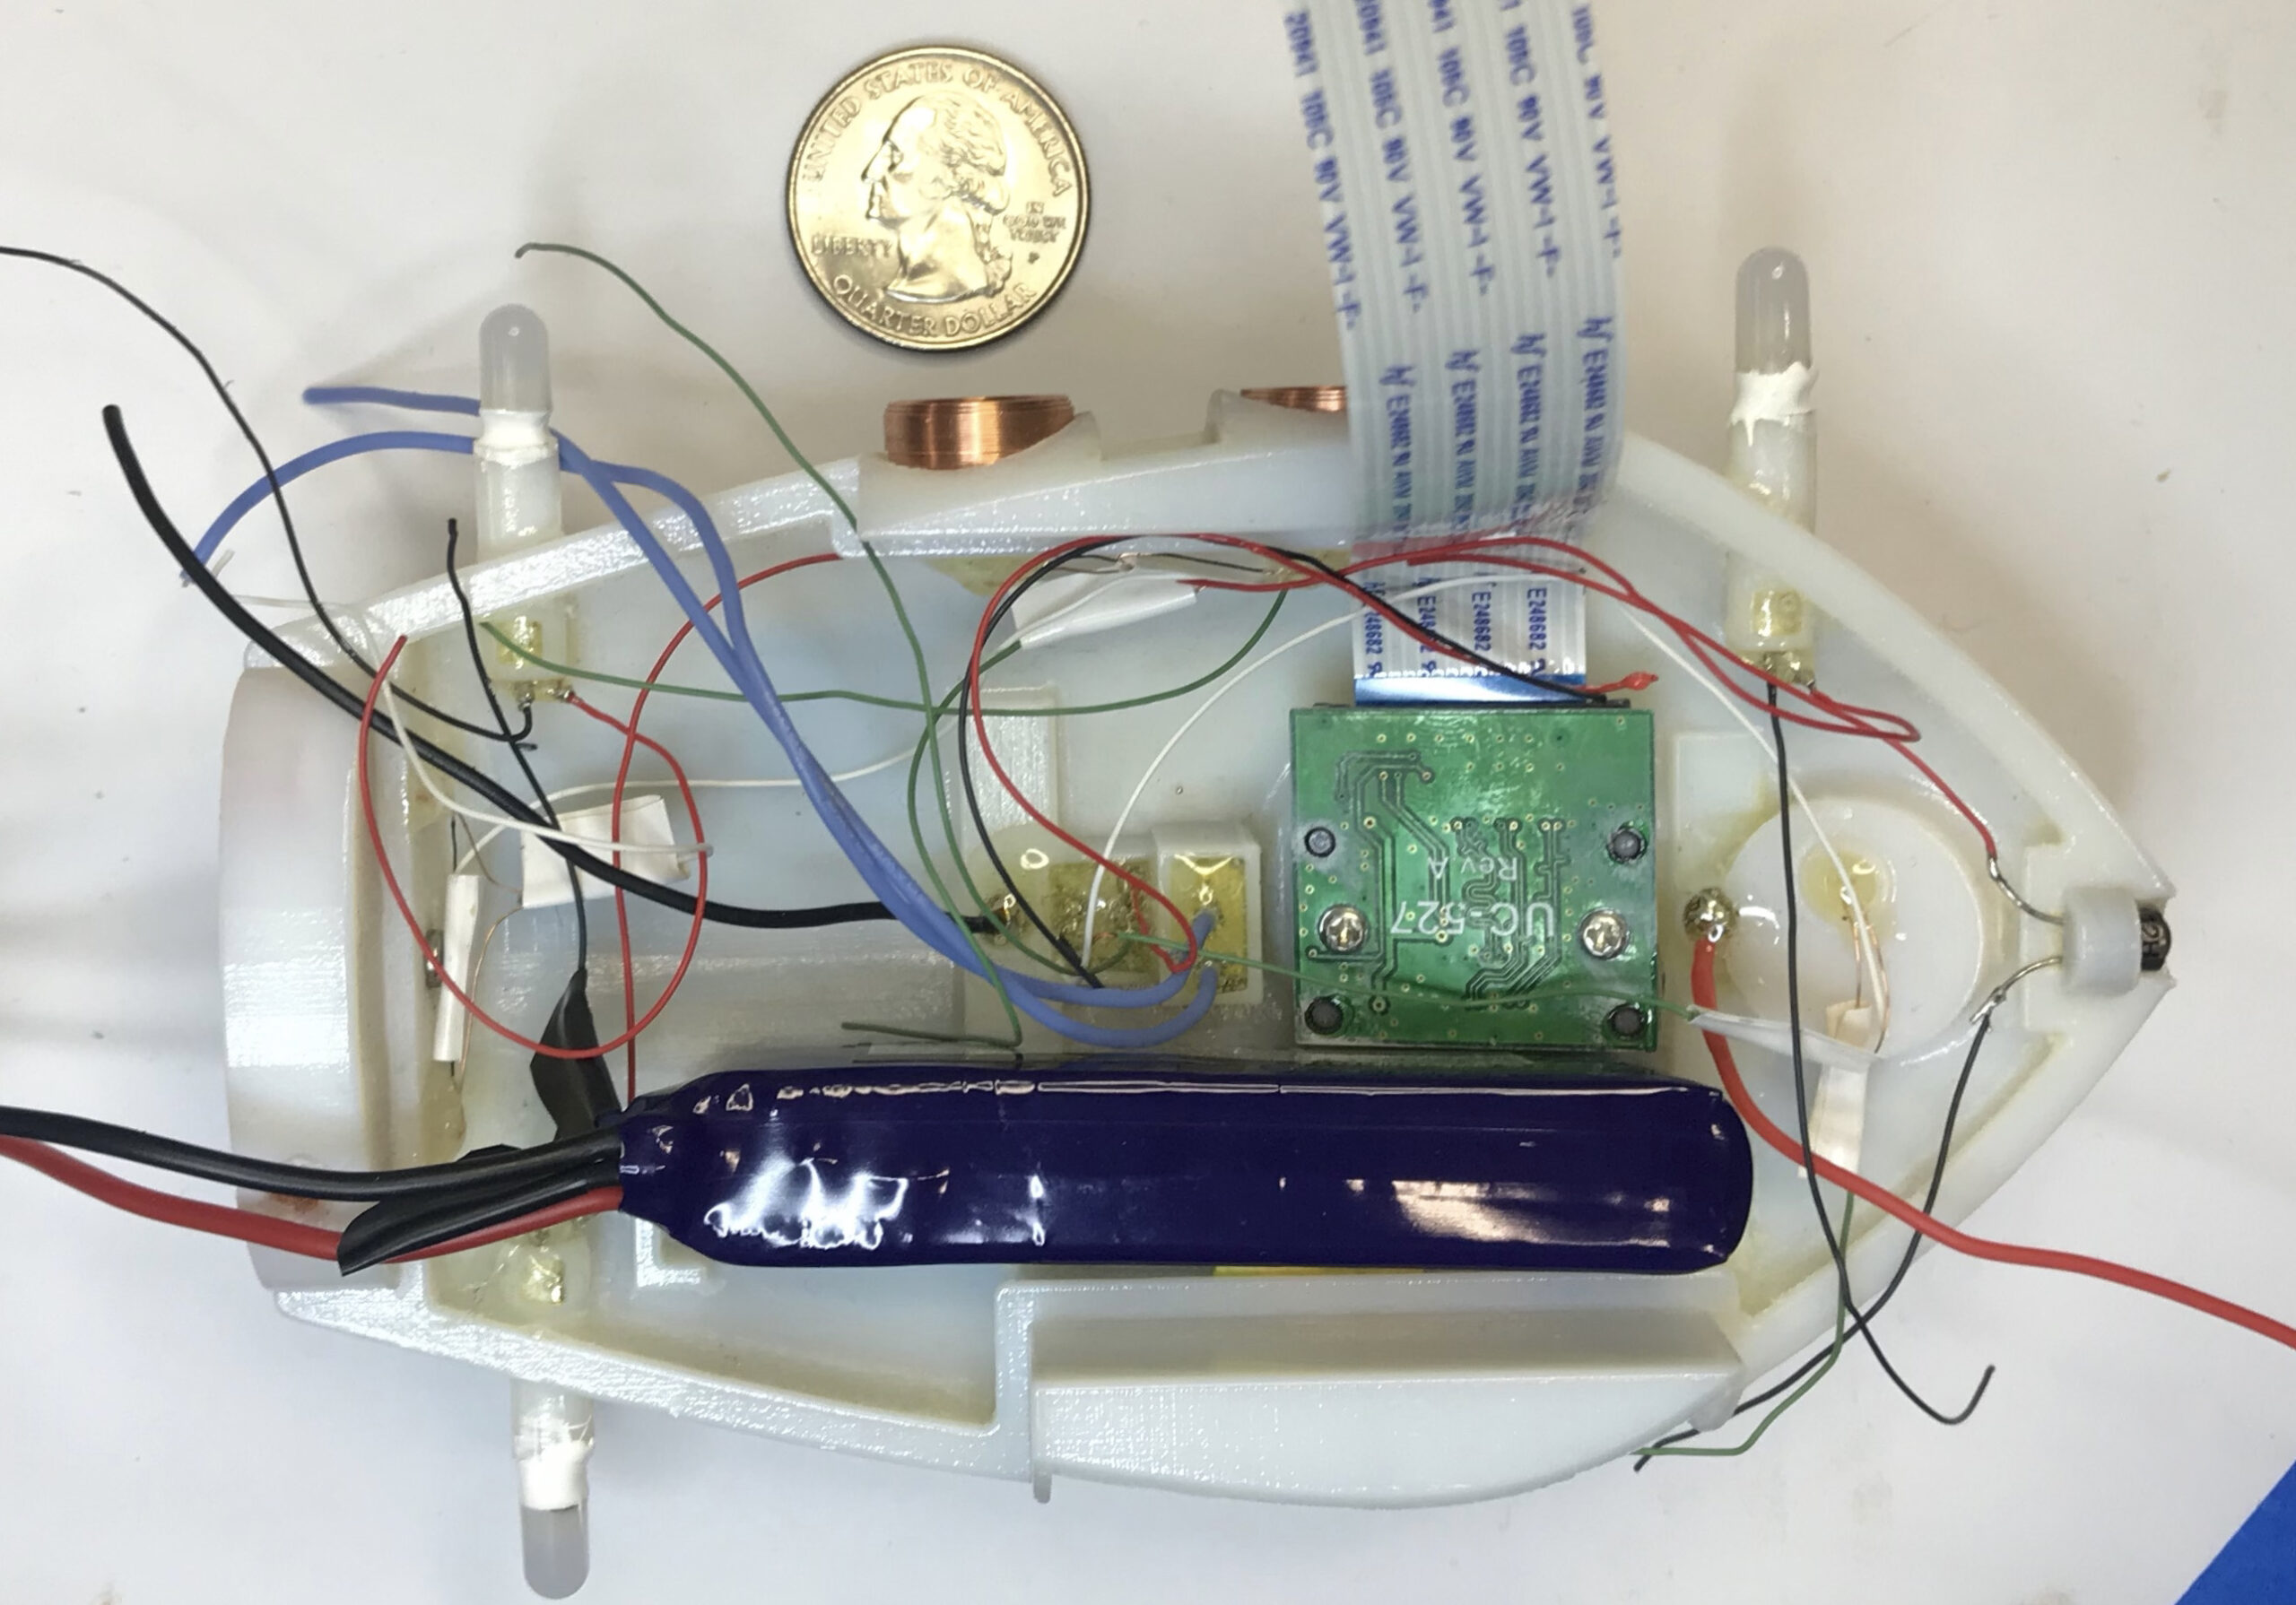 The Blueswarm team designed a PCB and wrote custom Python code for their subterranean Raspberry Pi experiments